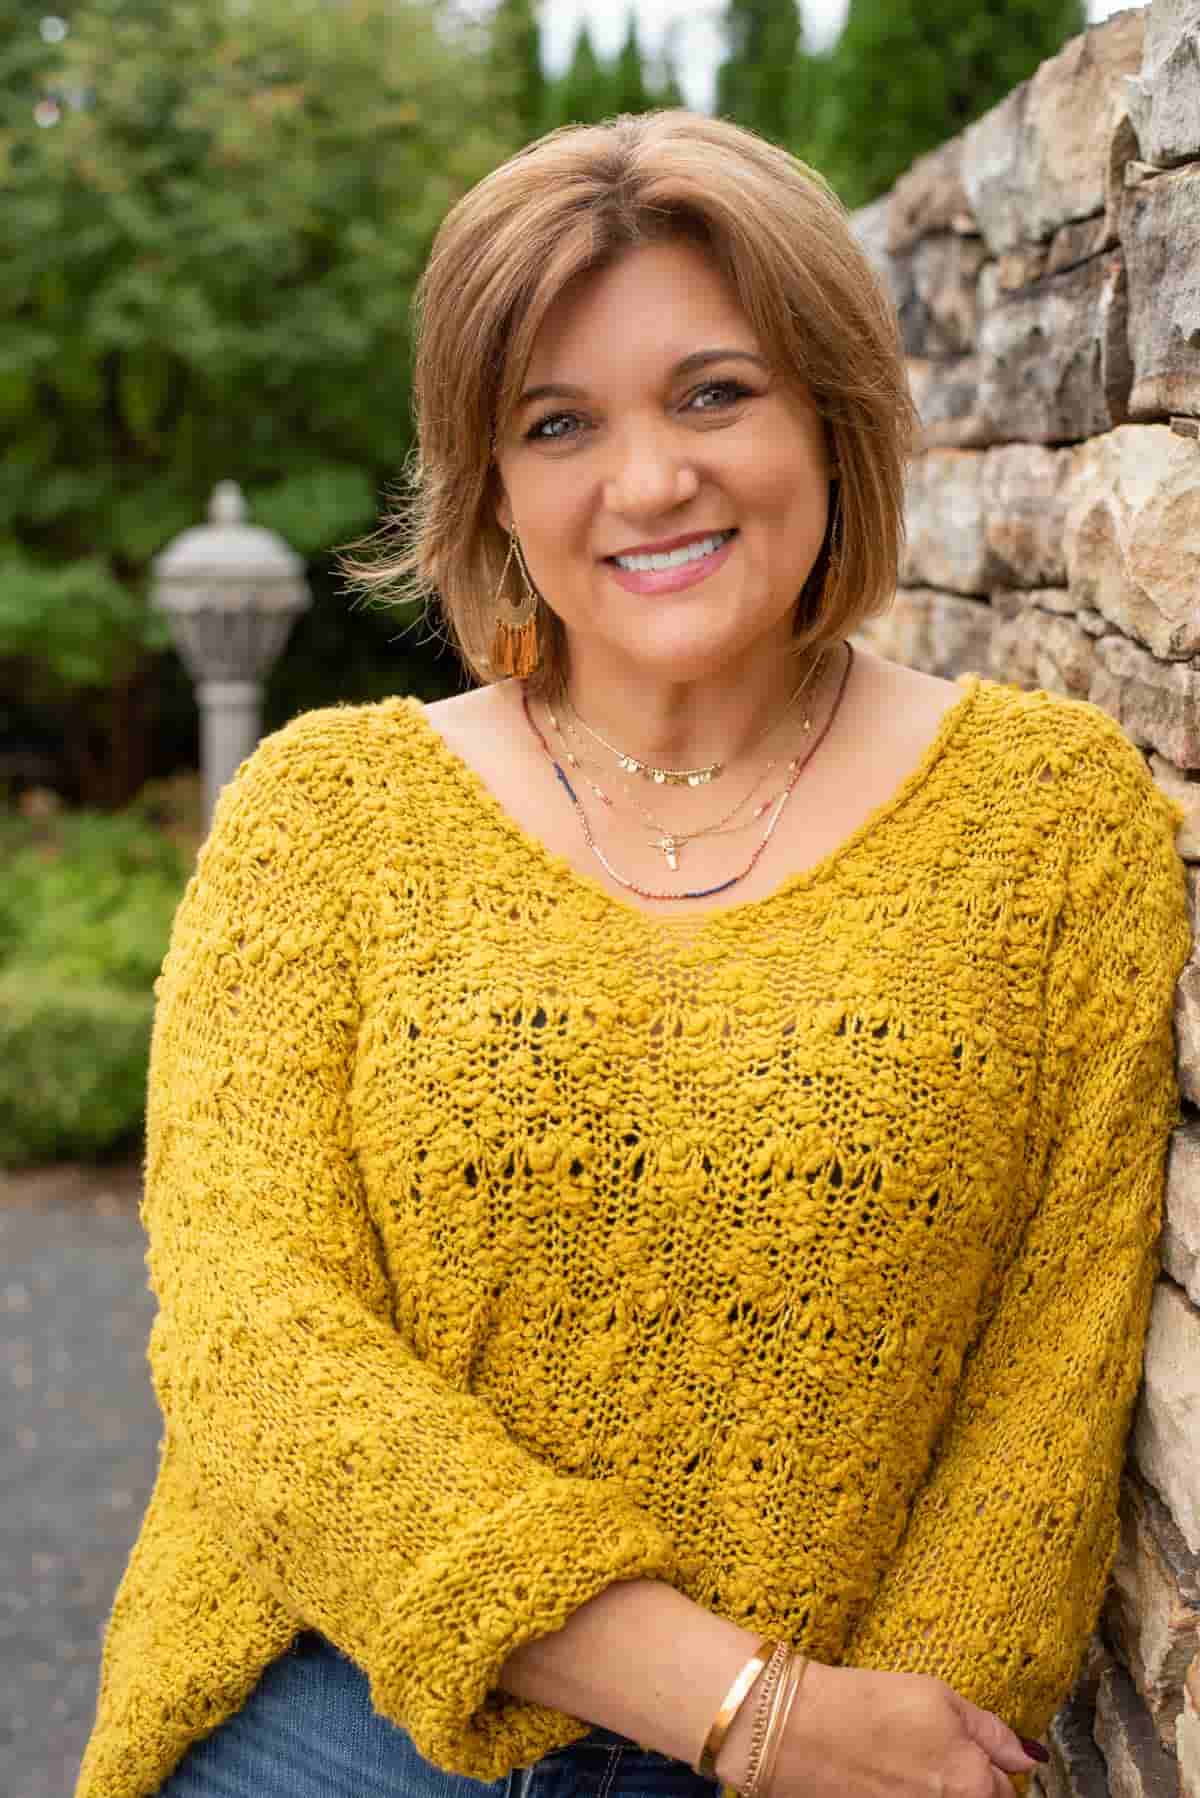 Woman with short brown hair and a yellow sweater, smiling outside next to a rock wall